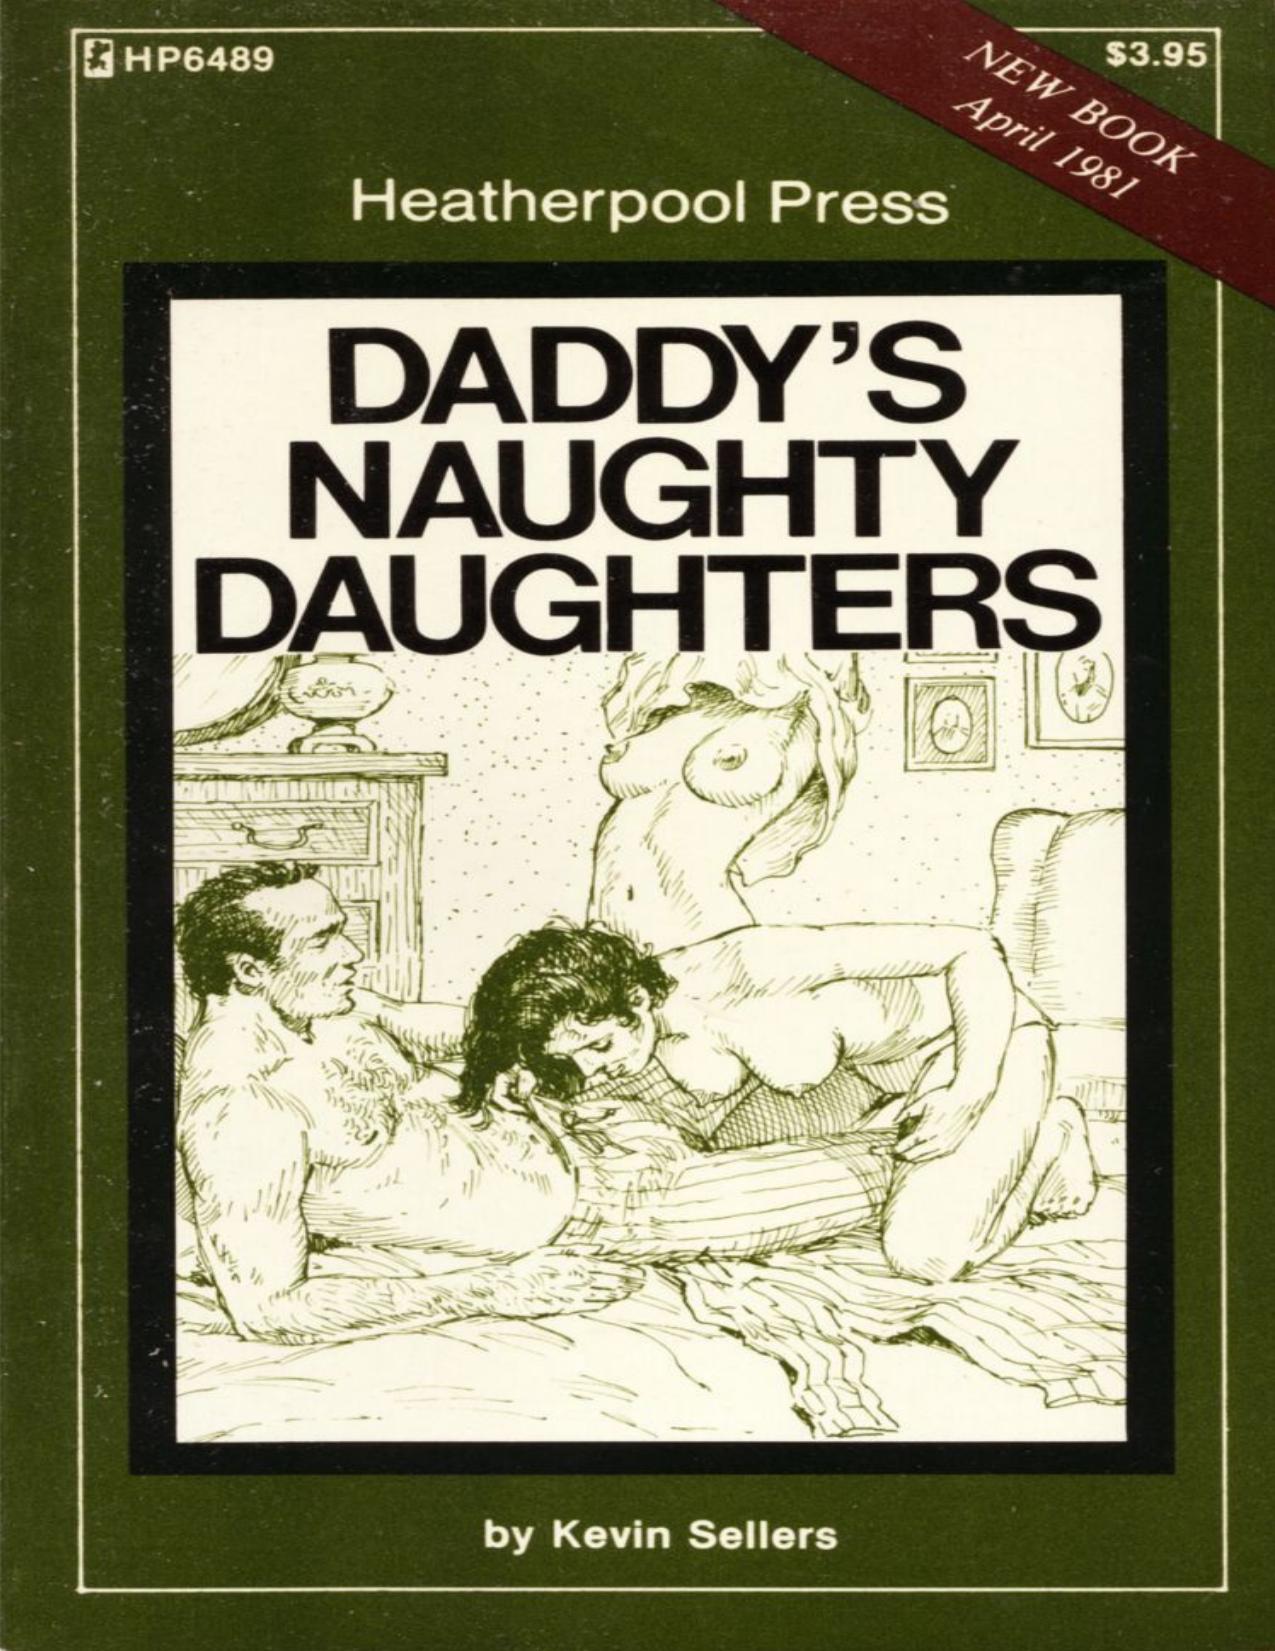 Daddy's Naughty Daughters by Kevin Sellers